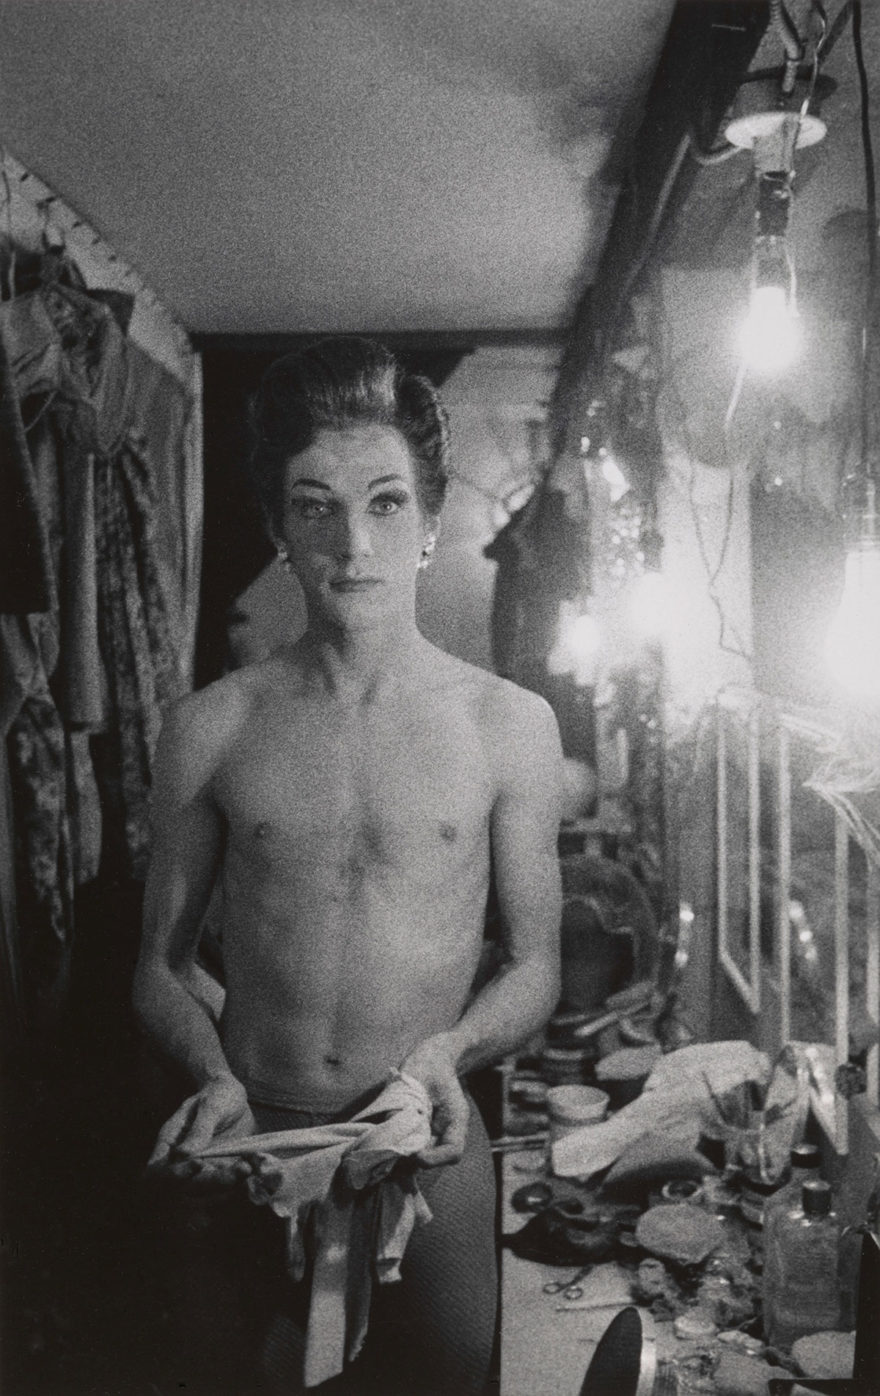 MONROWE, A Day with Diane Arbus